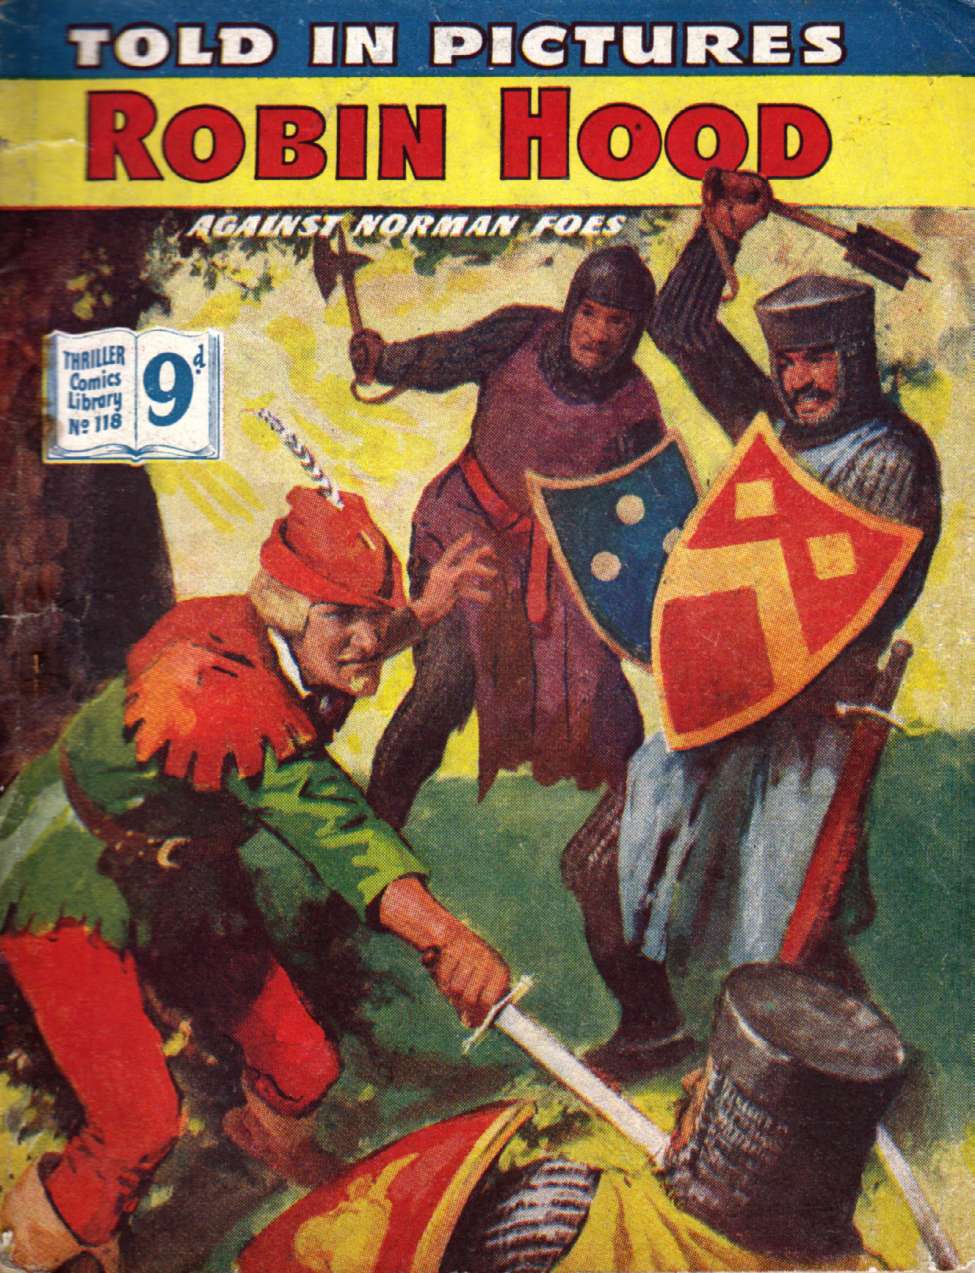 Book Cover For Thriller Comics Library 118 - Robin Hood Against Norman Foes